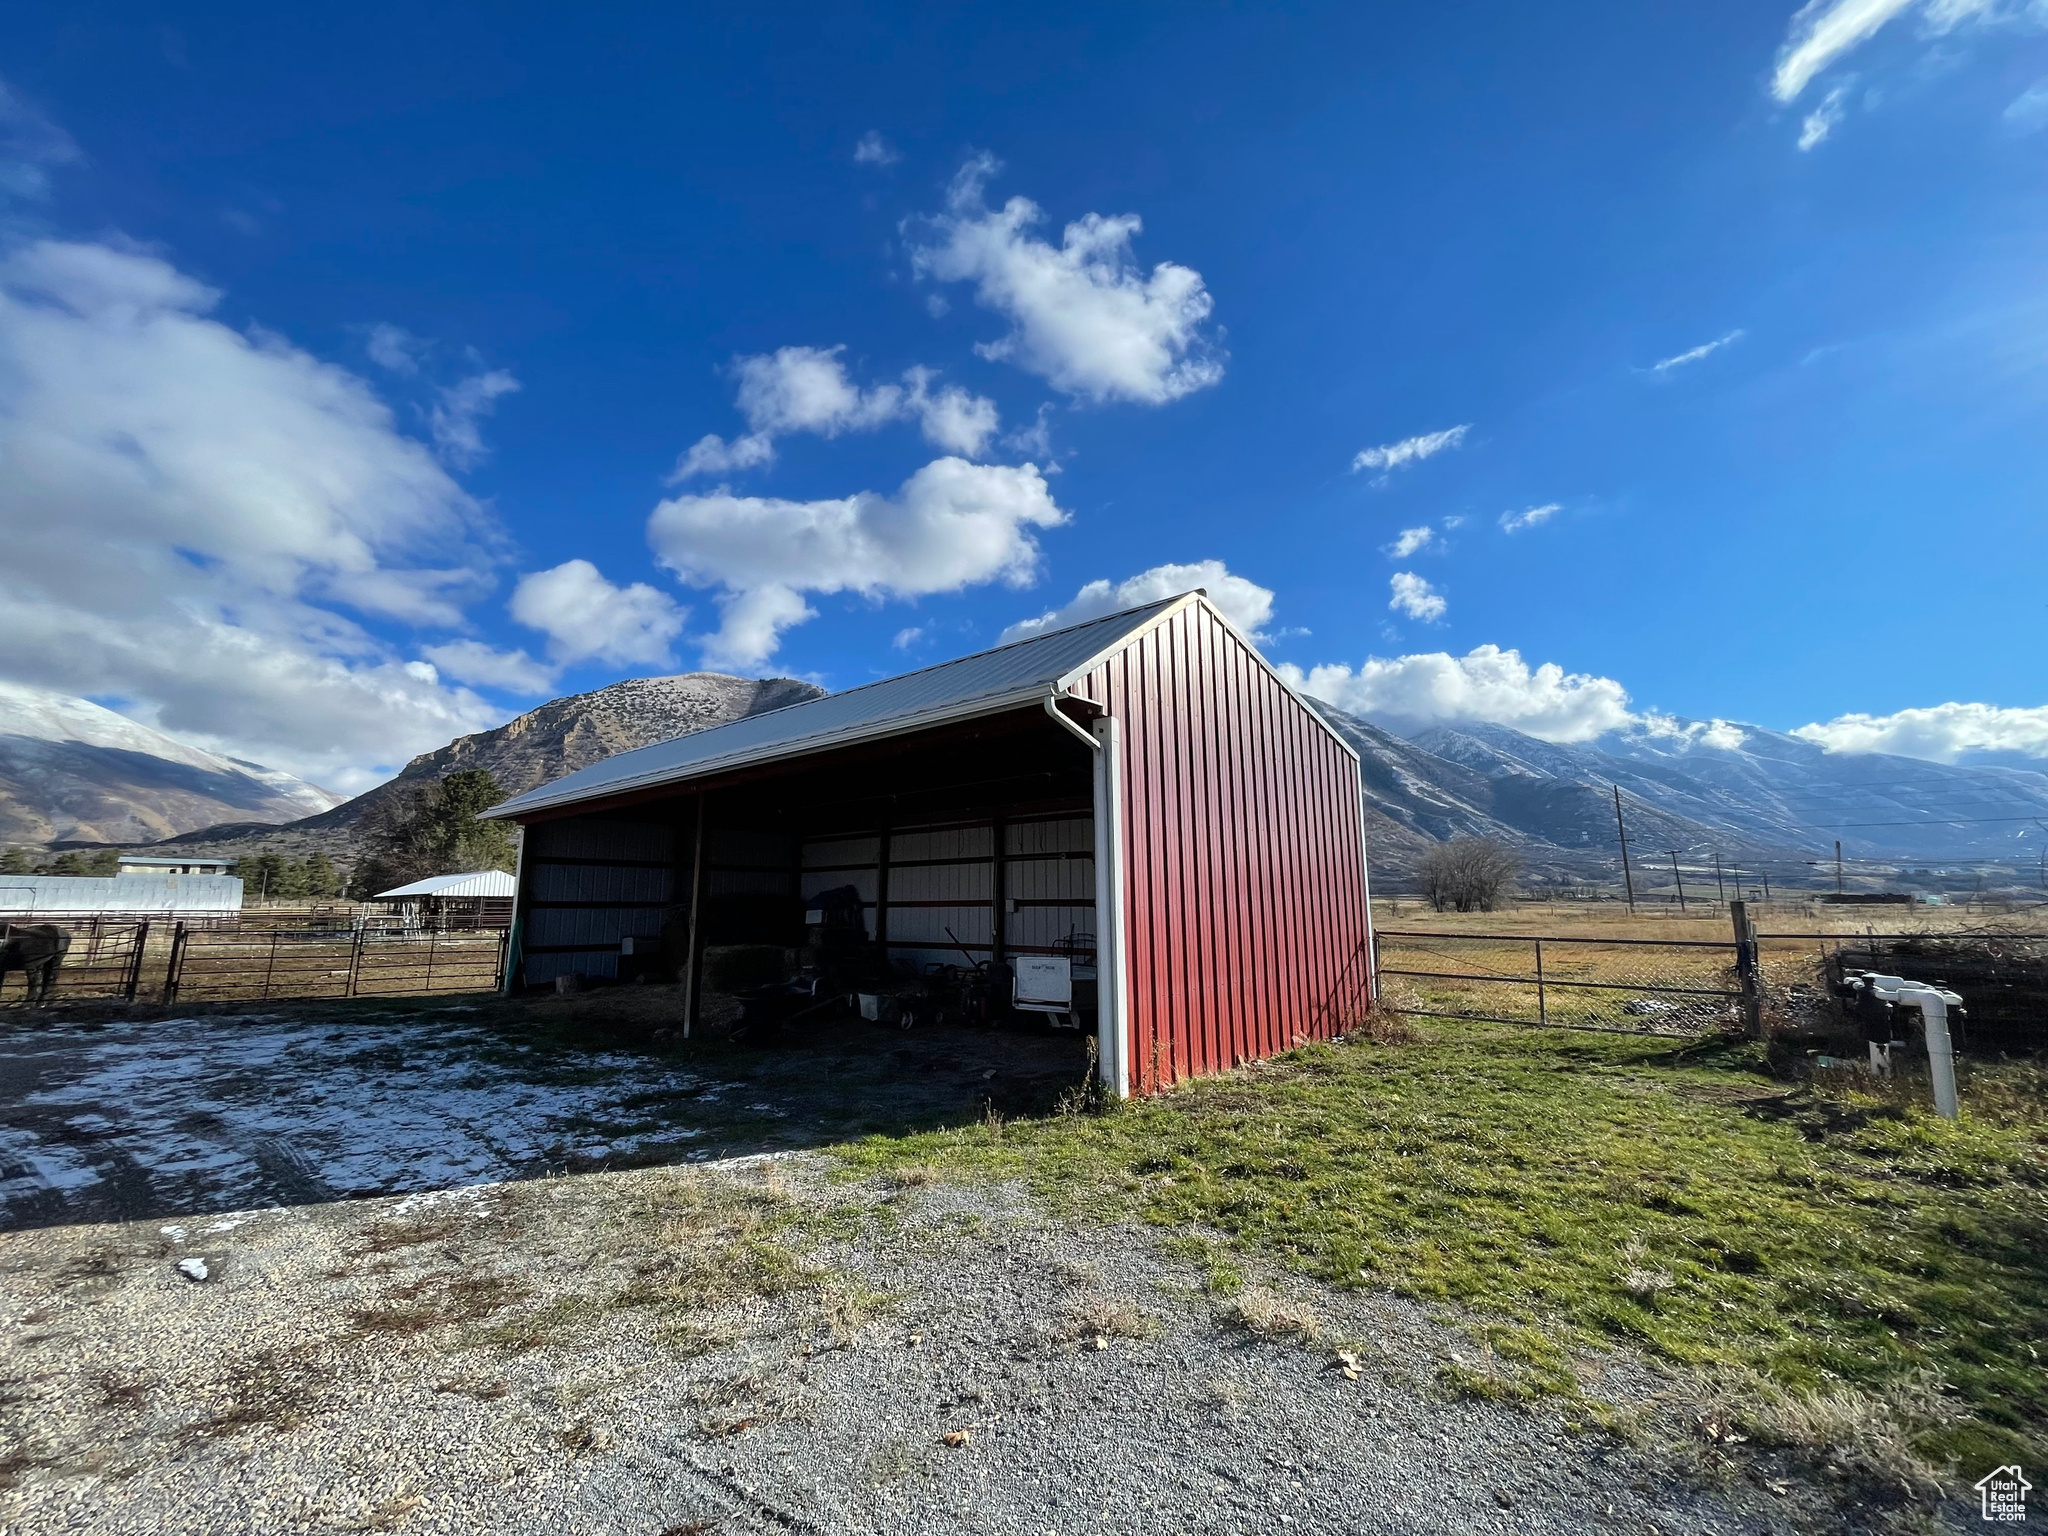 View of machine shed / structure with a mountain view, a rural view, and a carport